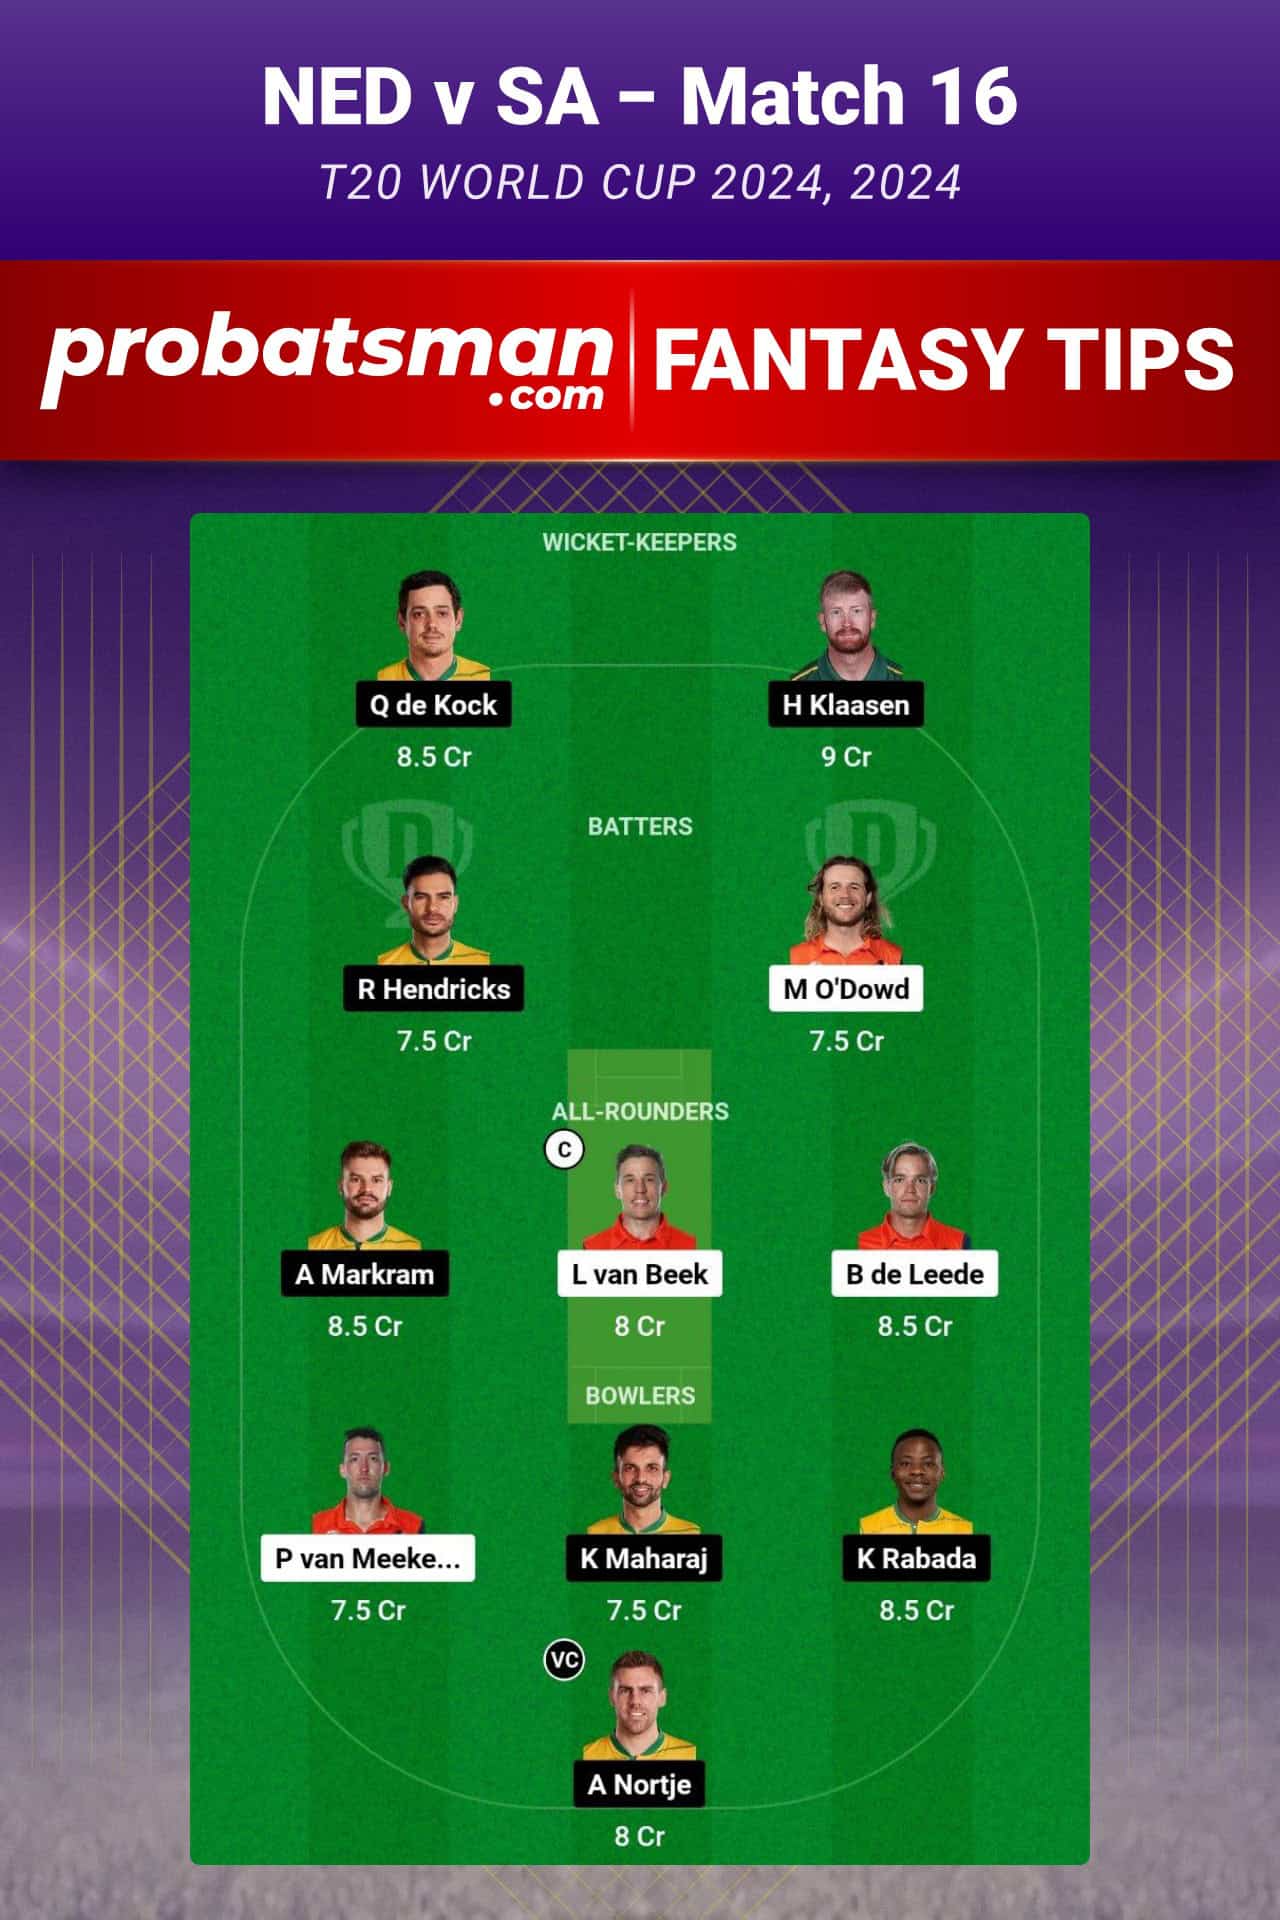 NED vs SA Dream11 Prediction For Match 16 of T20 World Cup 2024